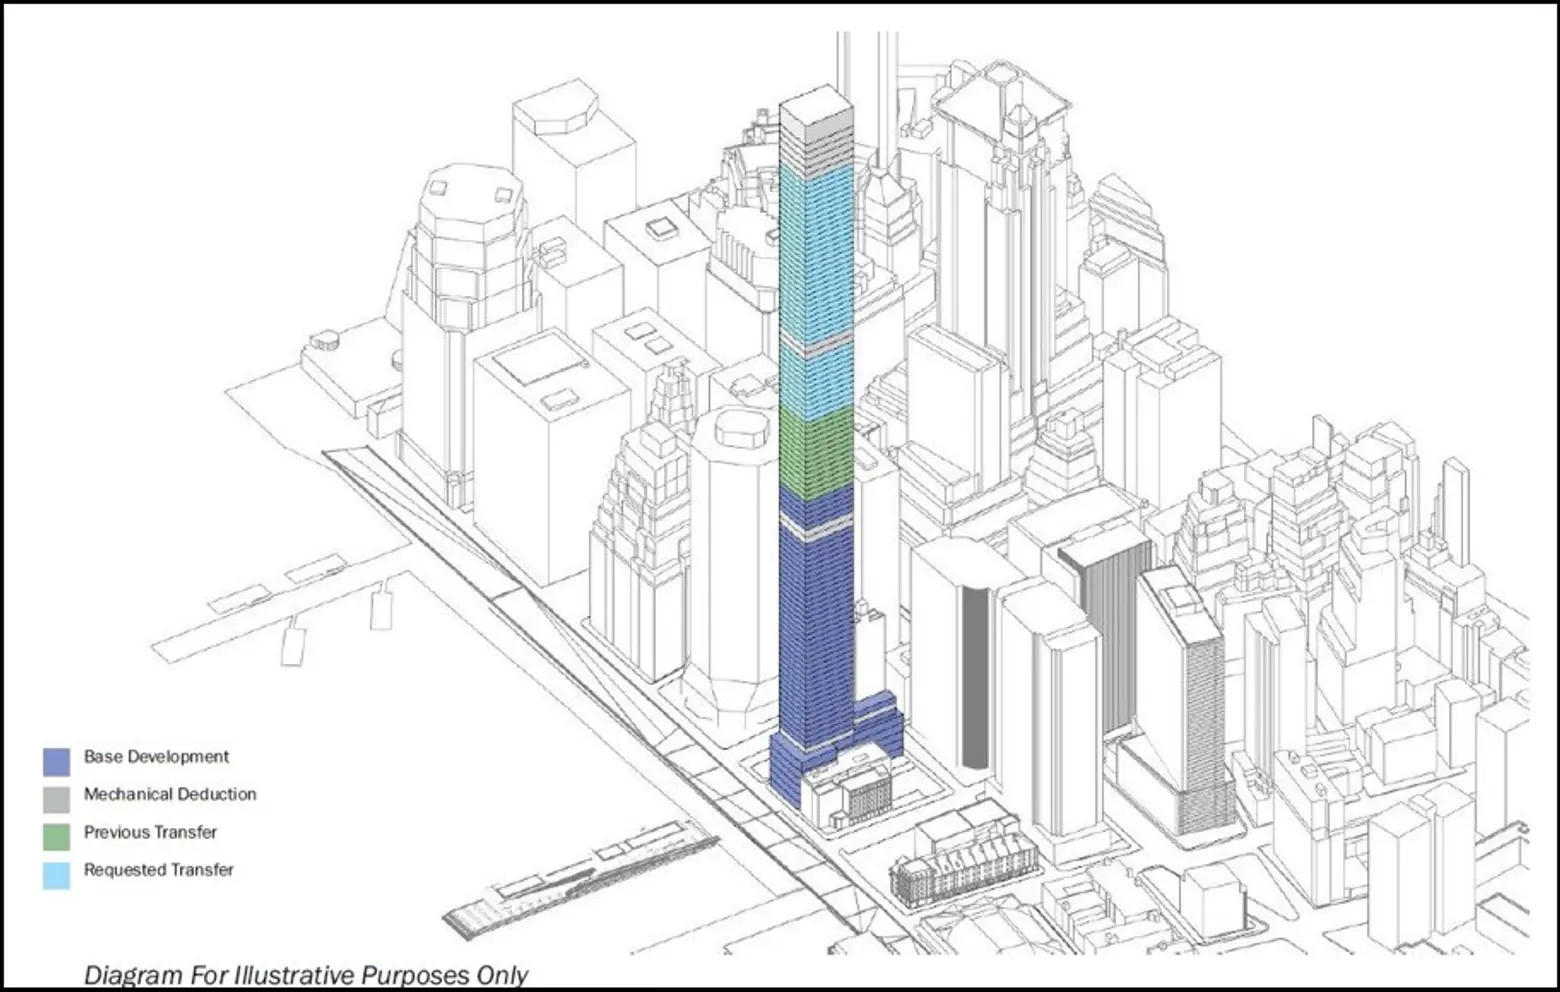 1,436-Foot Supertall May Rise at 80 South Street in the Financial District